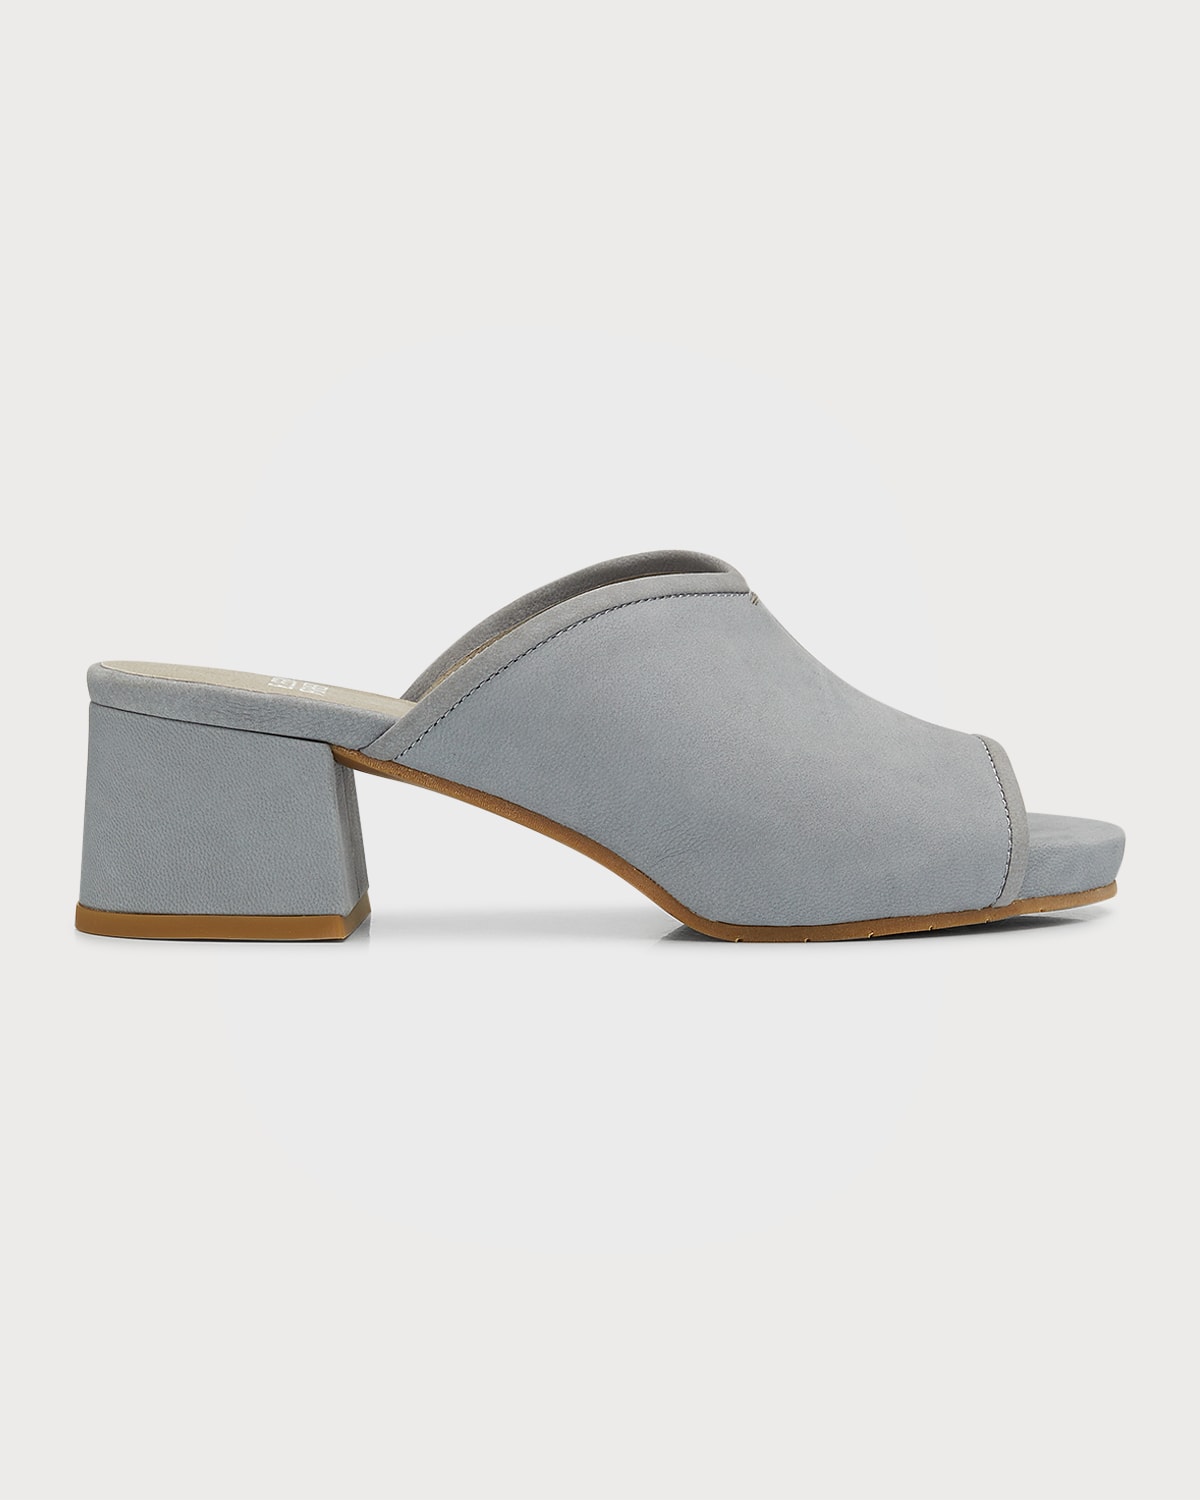 EILEEN FISHER FALA LEATHER MULES